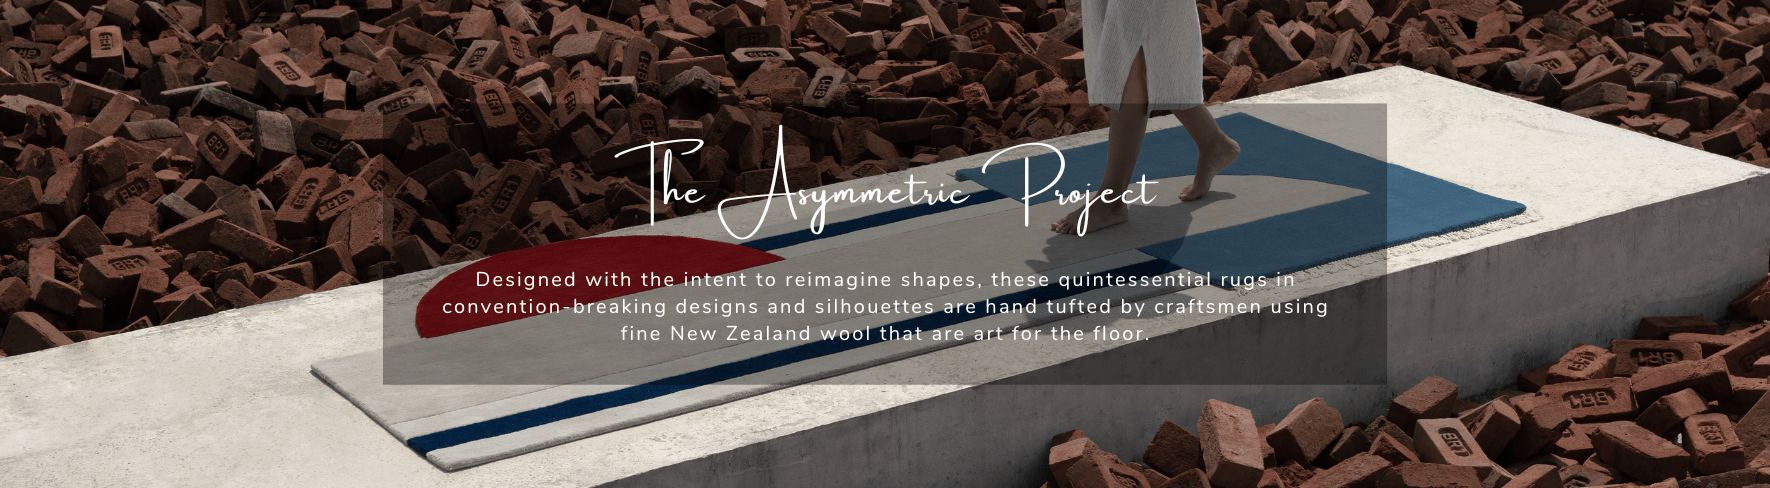 The Asymmetric Project